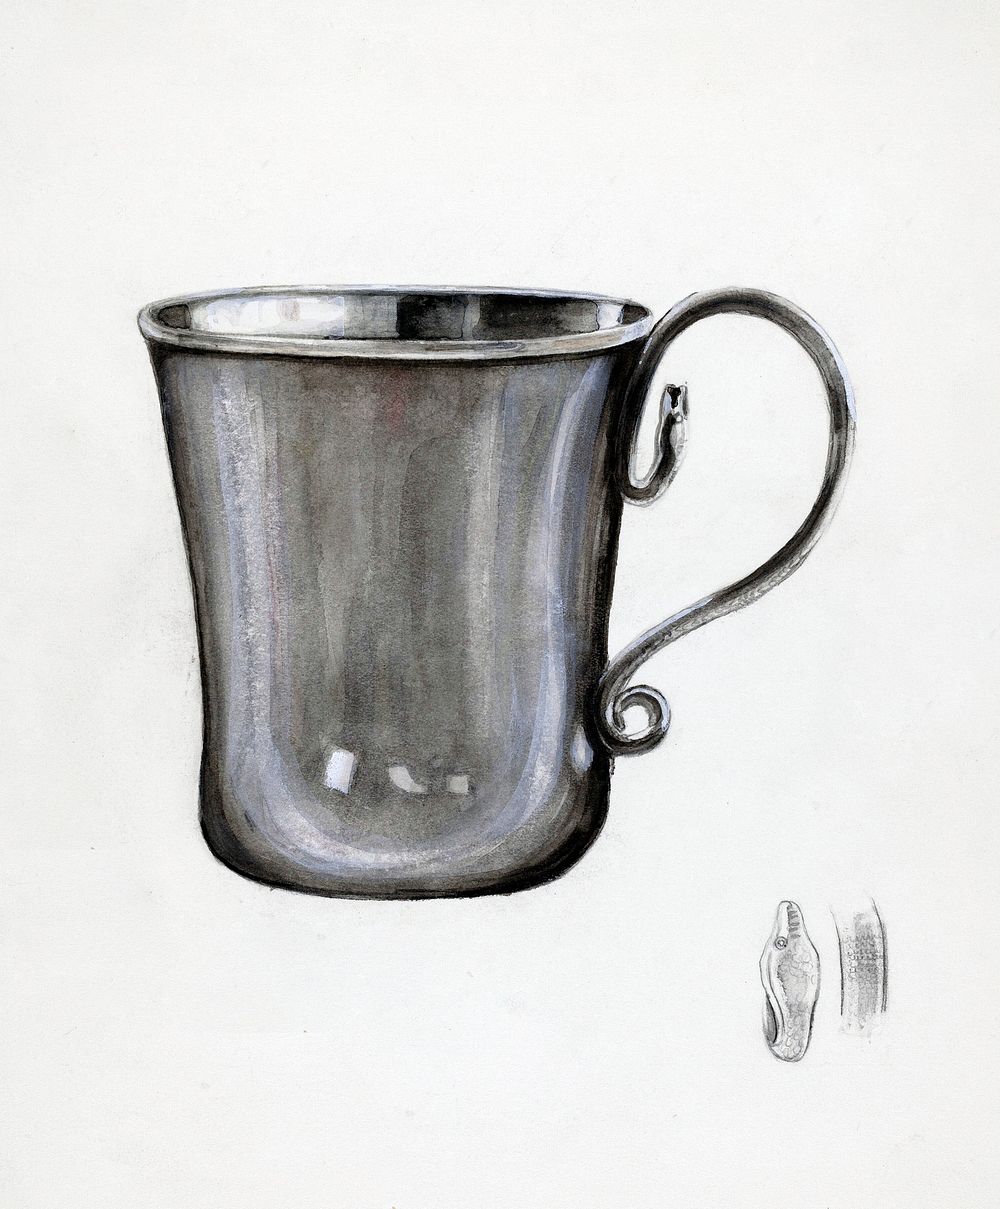 Silver Cup (ca.1936) by Cecily Edwards. Original from The National Gallery of Art. Digitally enhanced by rawpixel.